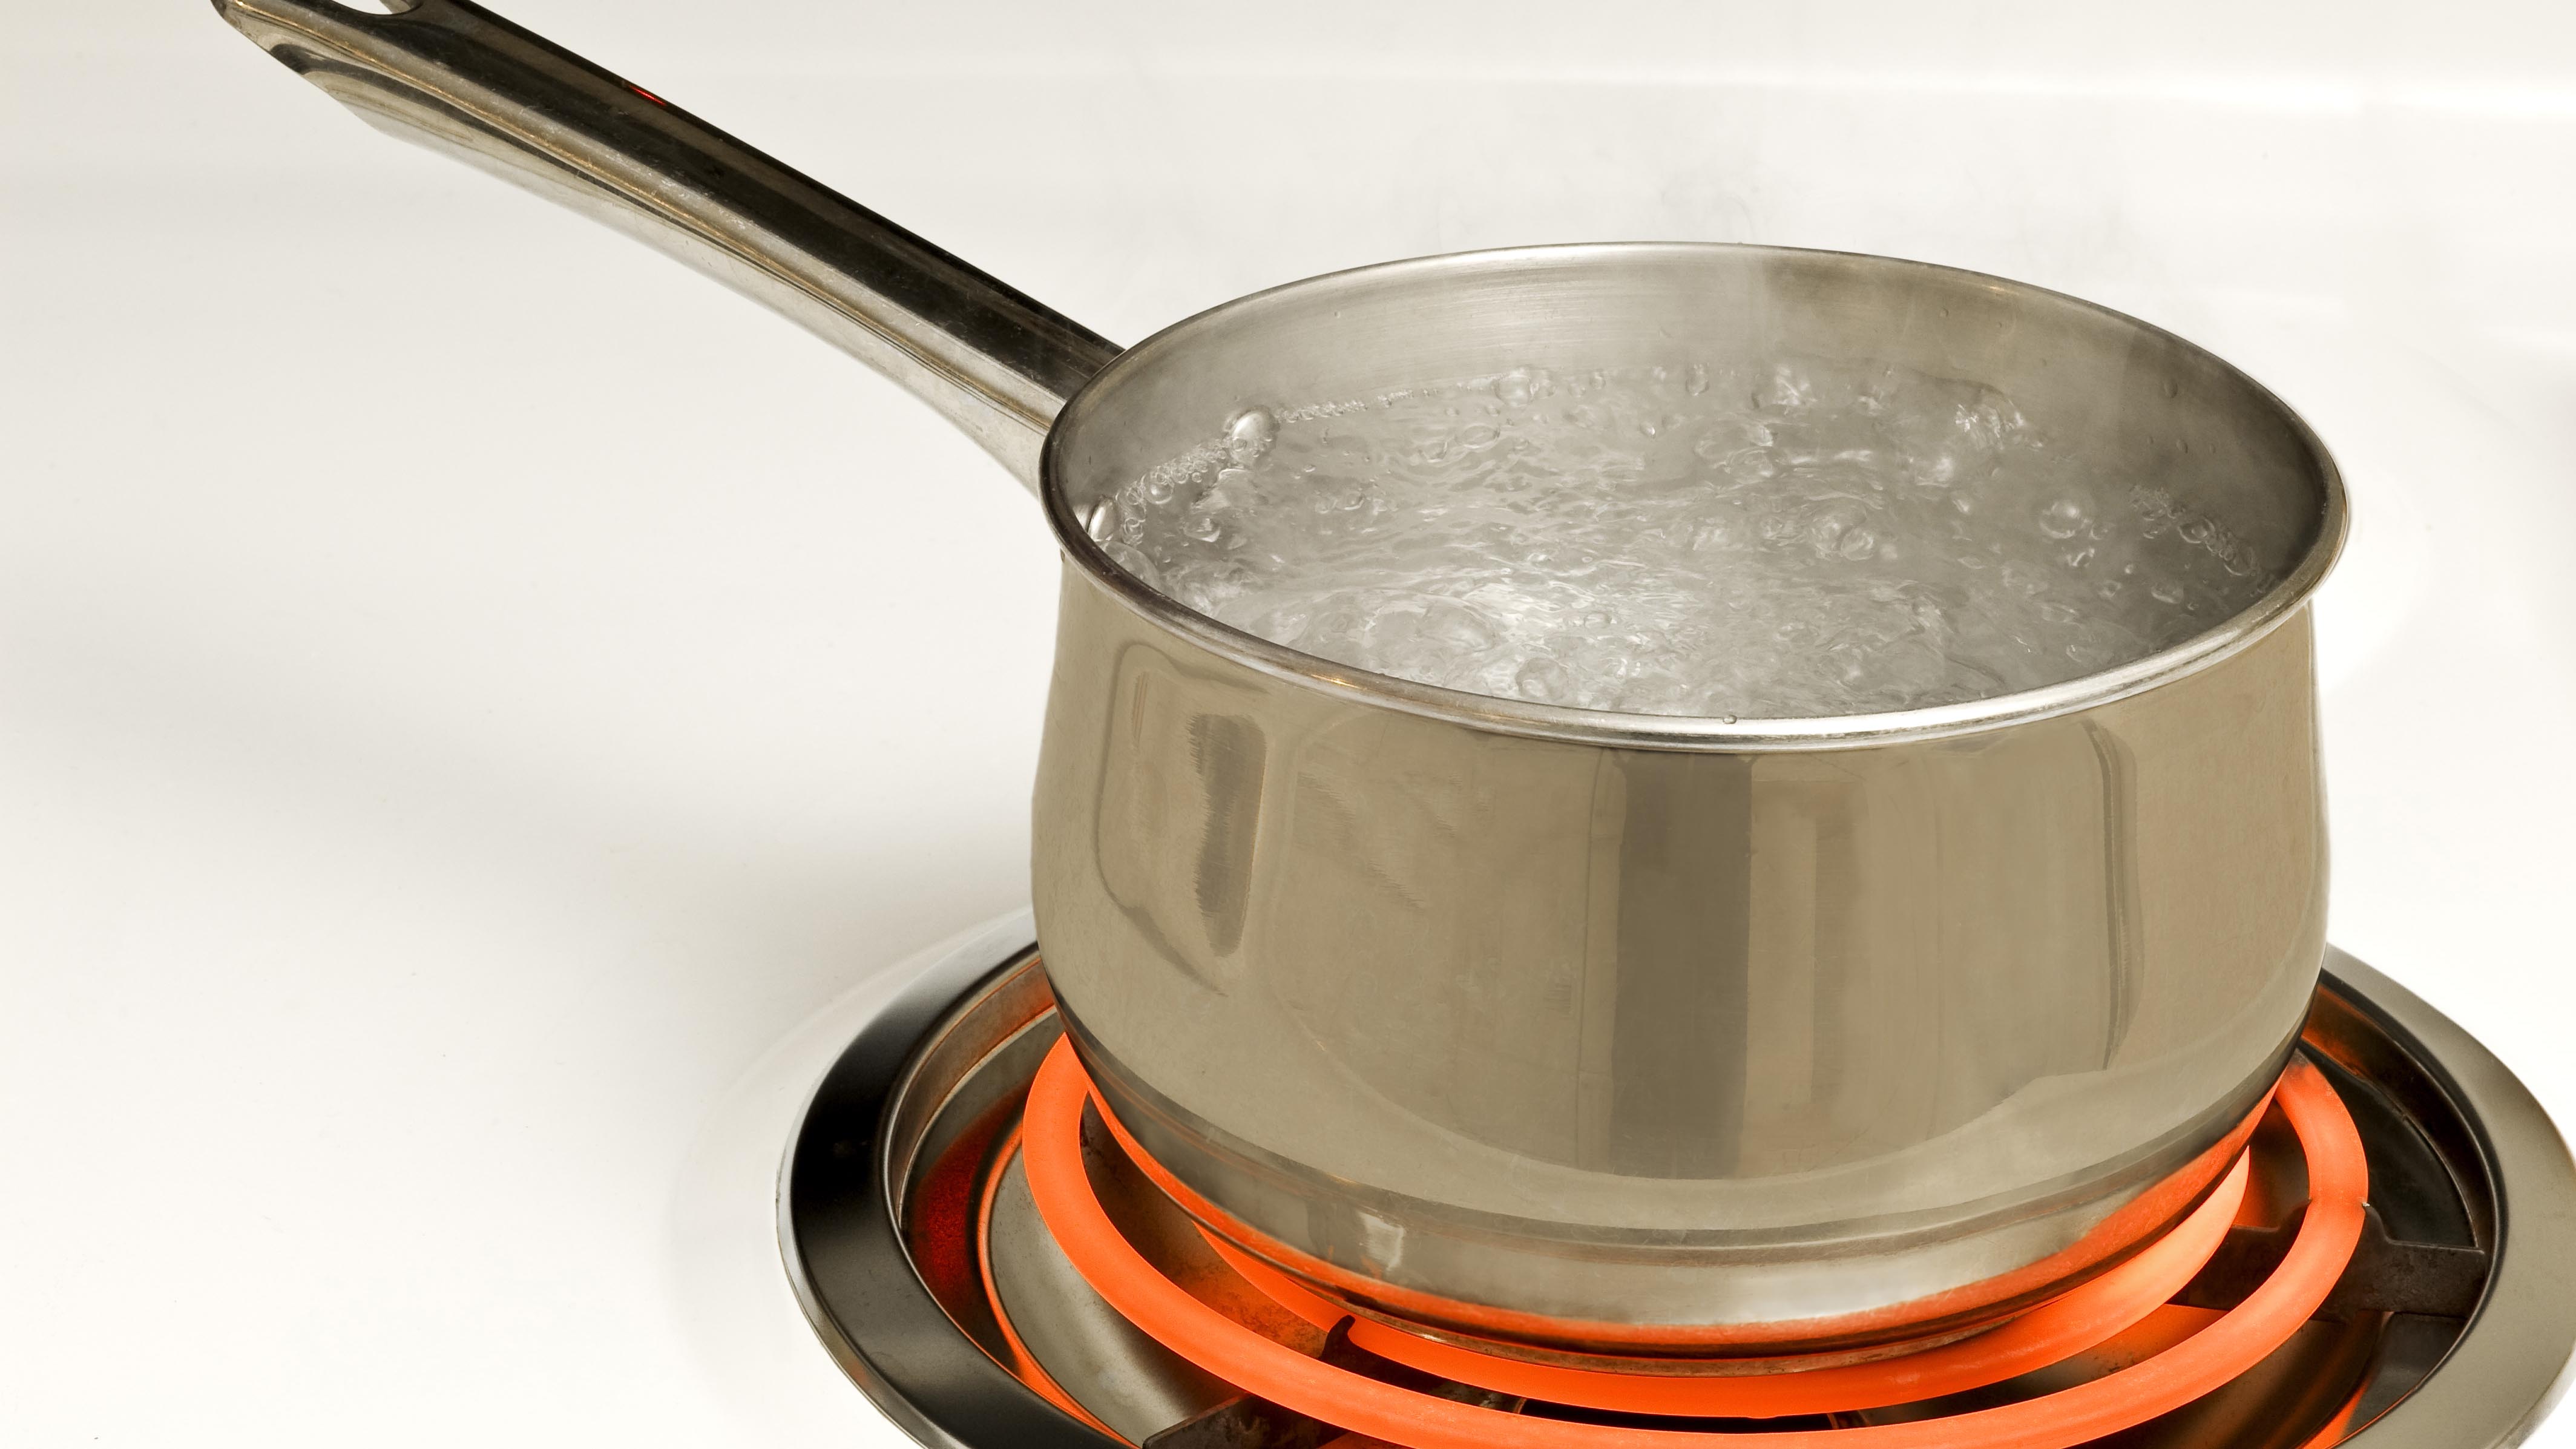 For cooking food in a liquid or steam фото 65